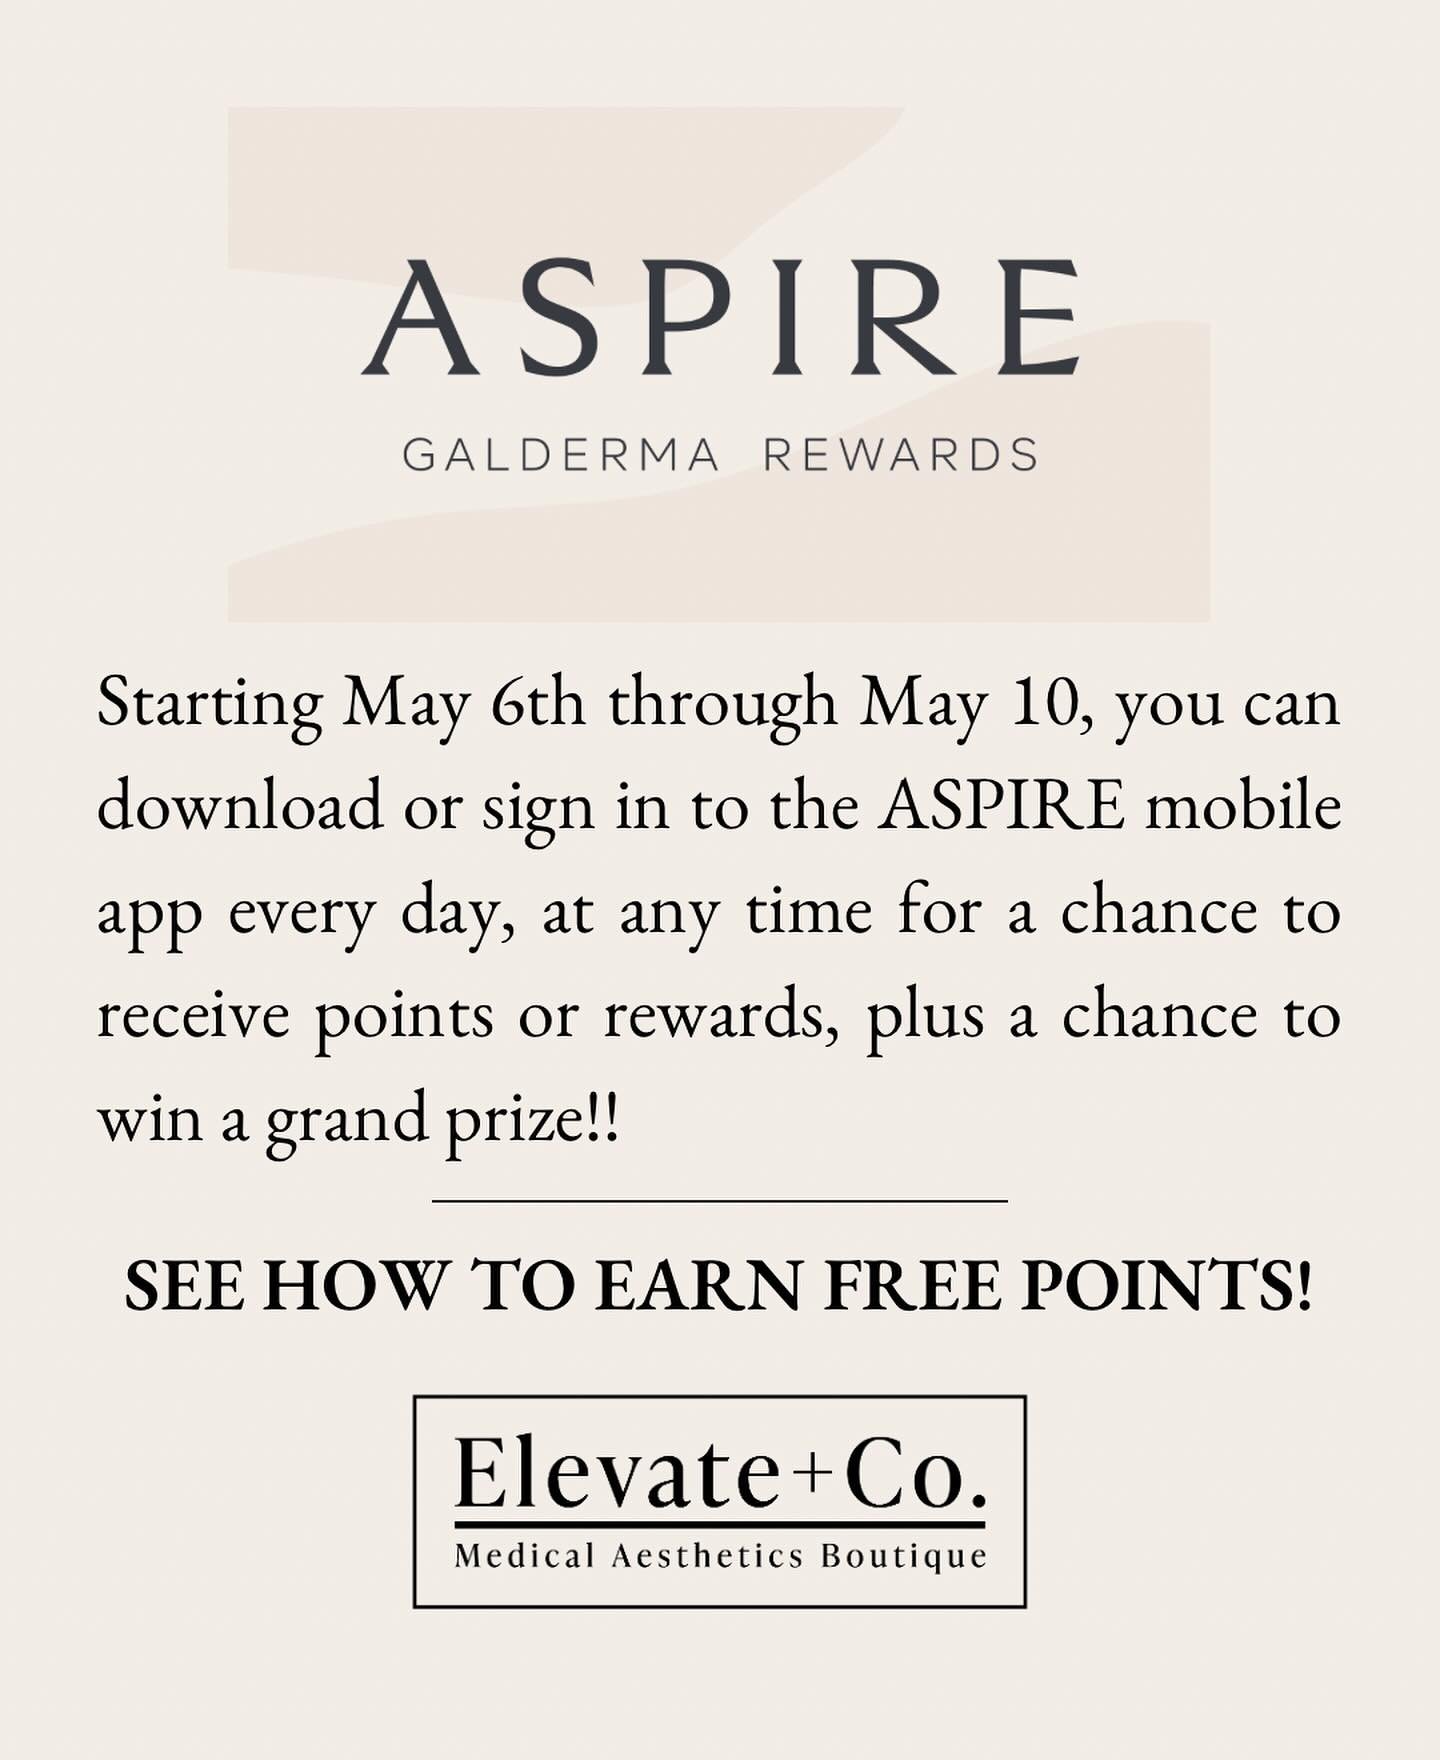 Download the Aspire app by @galderma and save BIG on your next treatment. See instructions and good luck! 

&bull;&bull;&bull;&bull;&bull;&bull;&bull;&bull;&bull;&bull;
Elevate + Co. 
BOOK HERE 
💻elevateandcomke.com 
📱414-339-3499
106 W Seeboth St,